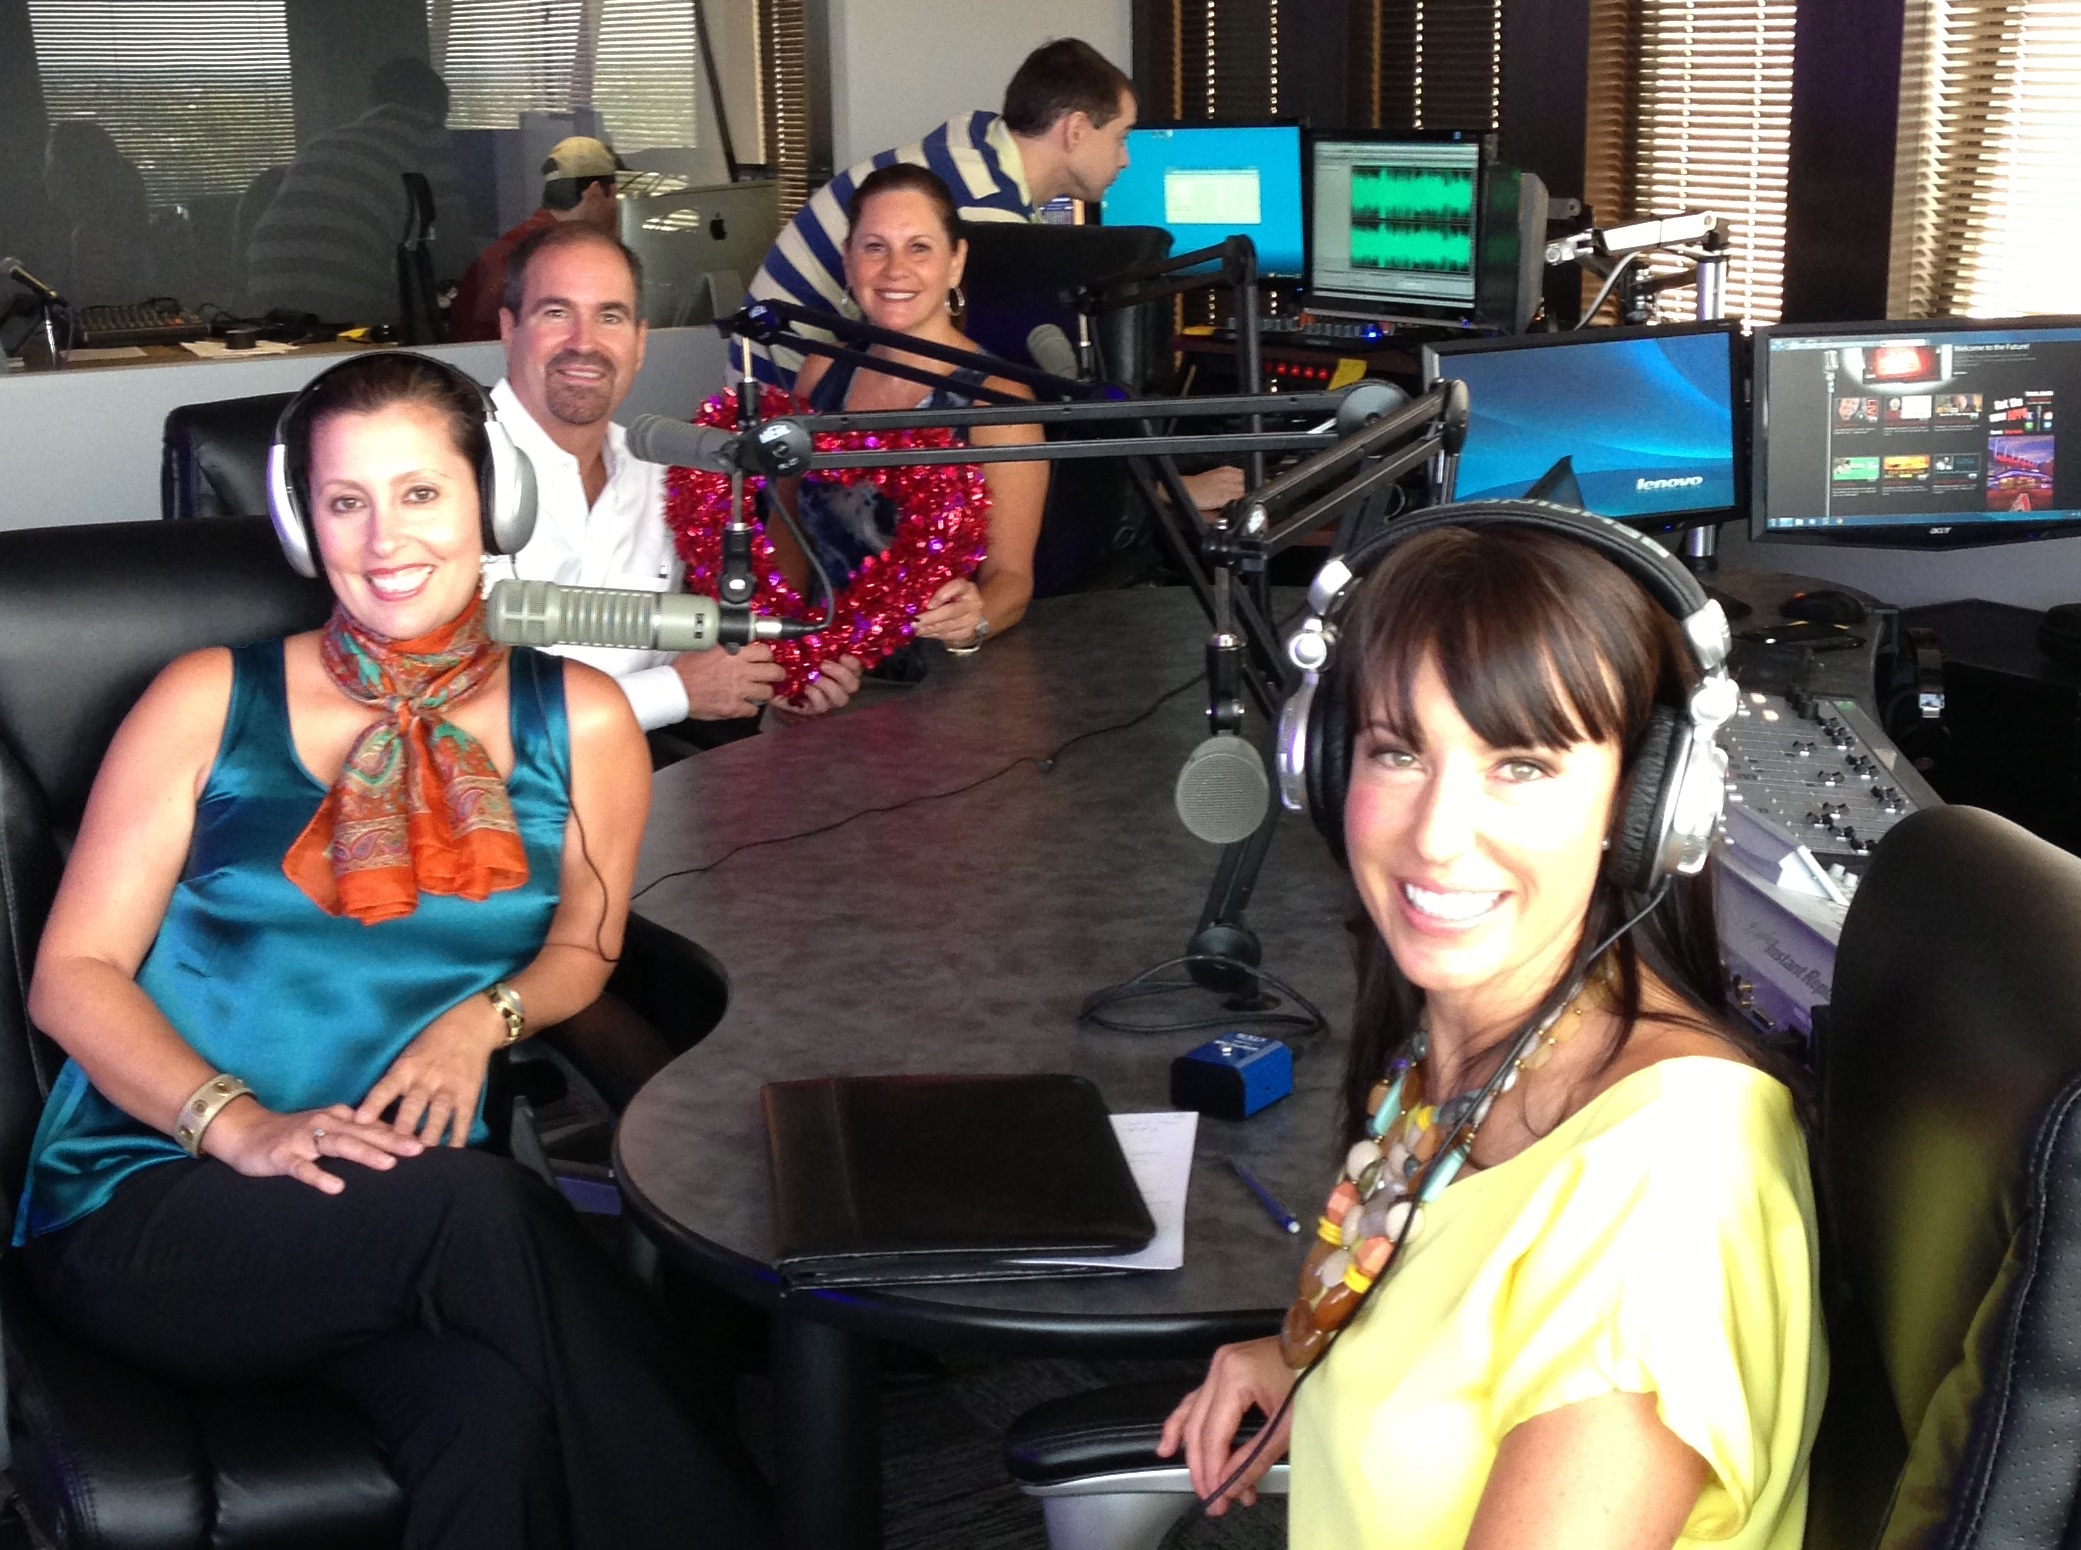 Lori Anna Harrison (front right) has joined the "Java with John" show as co-host. The show airs on Wednesdays at 9:00 a.m.